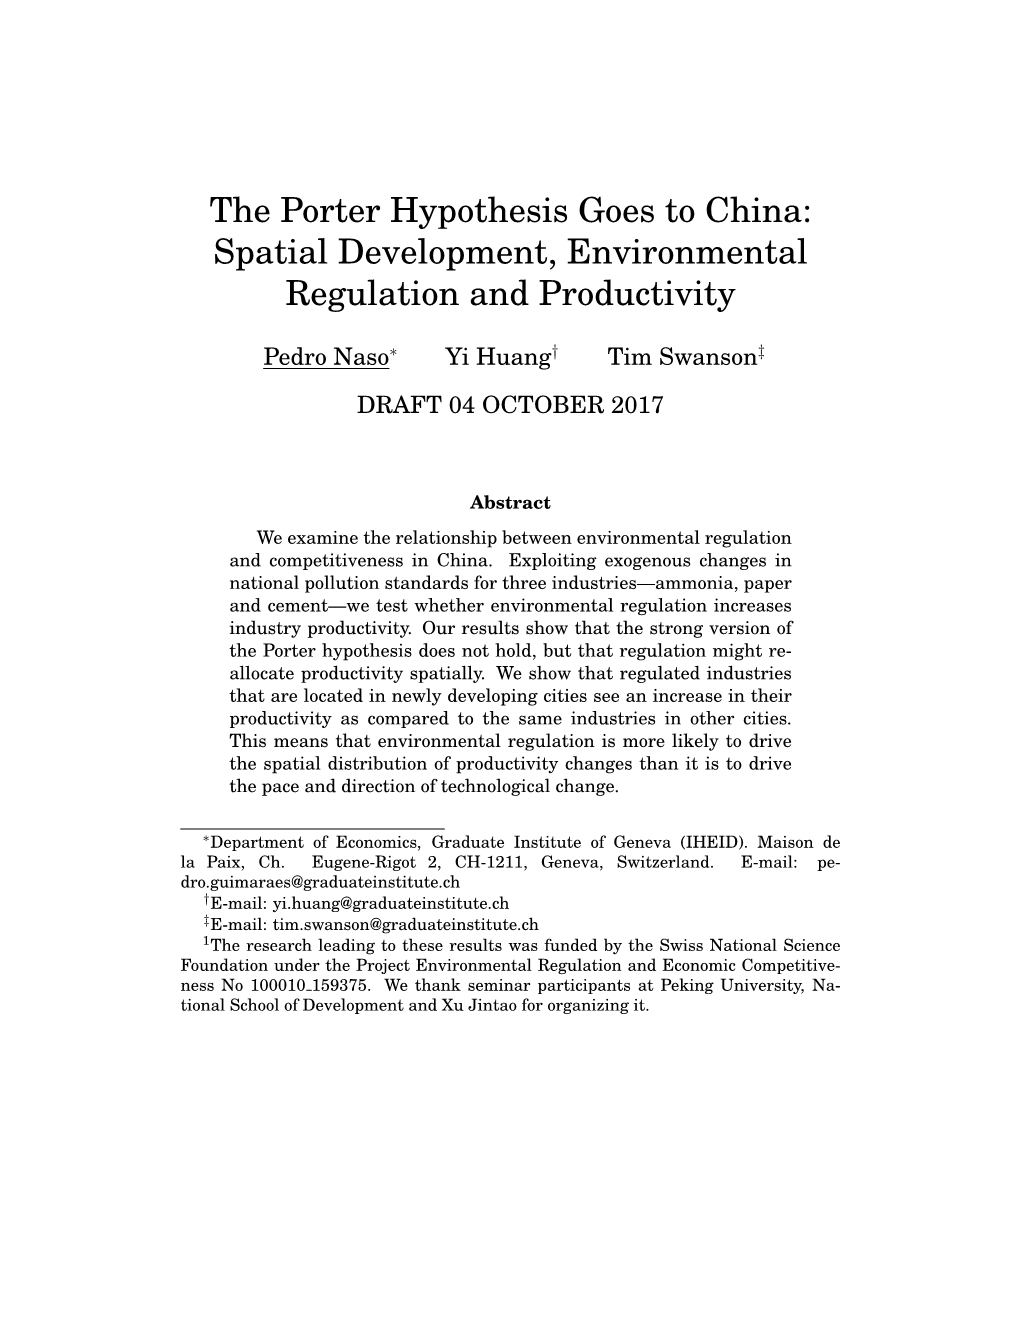 The Porter Hypothesis Goes to China: Spatial Development, Environmental Regulation and Productivity